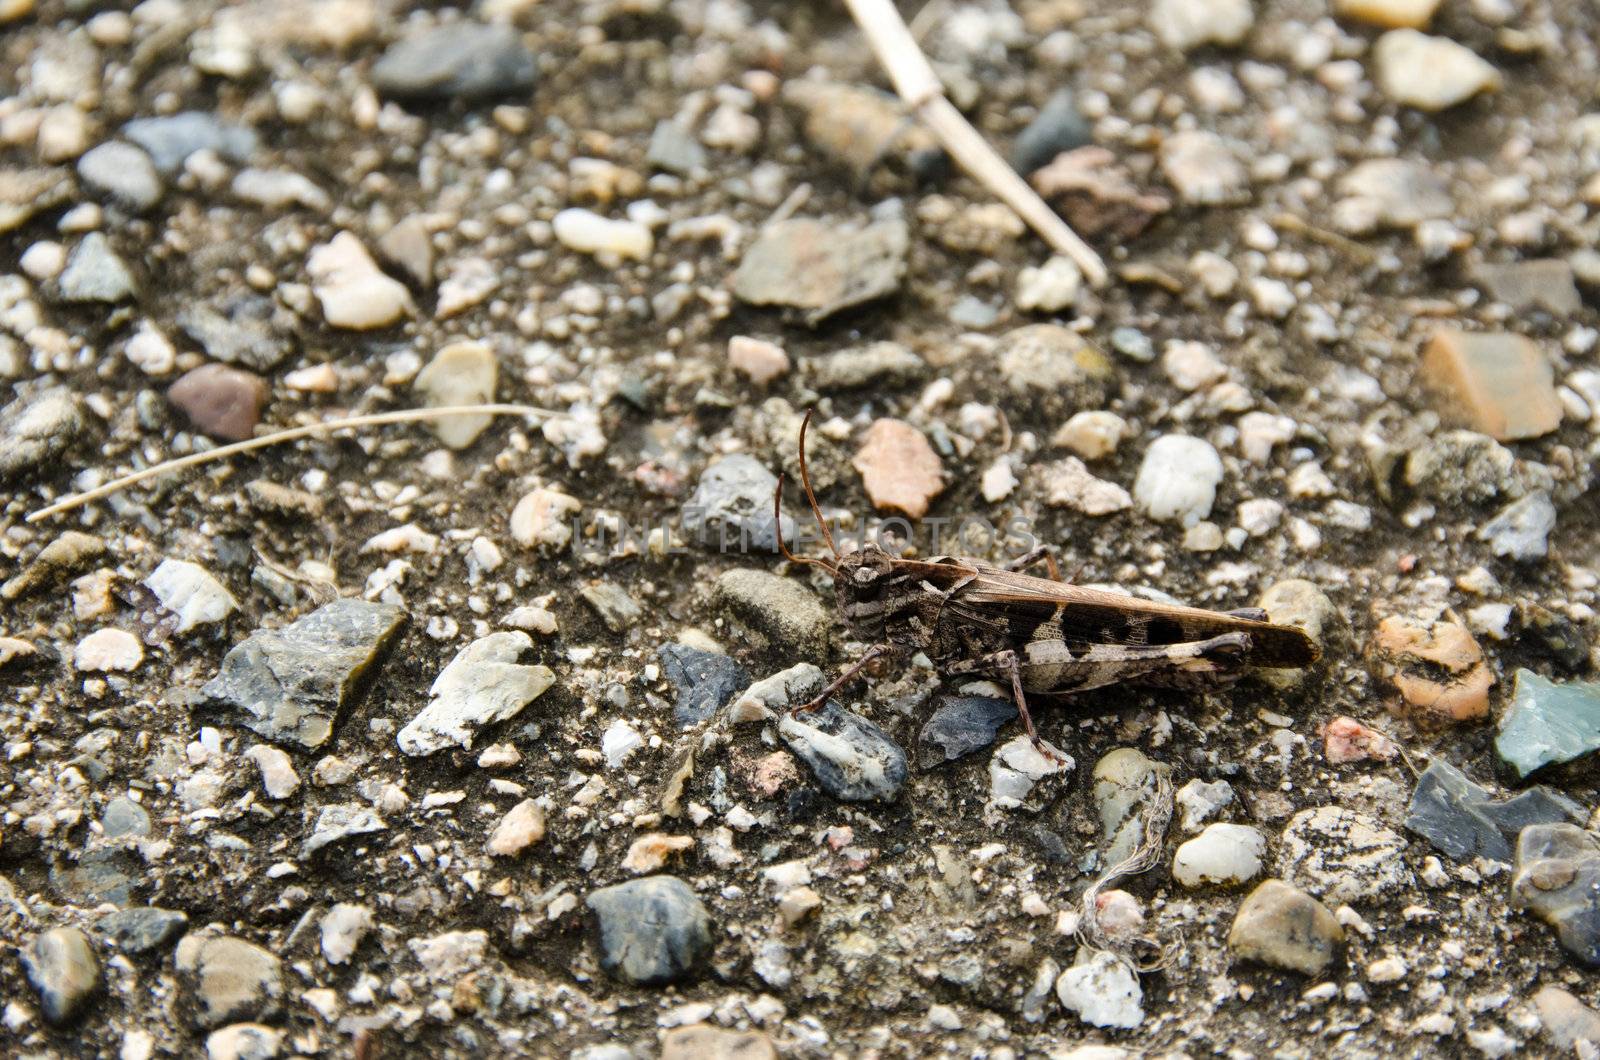 Brown grasshopper on gravel background very well camouflaged